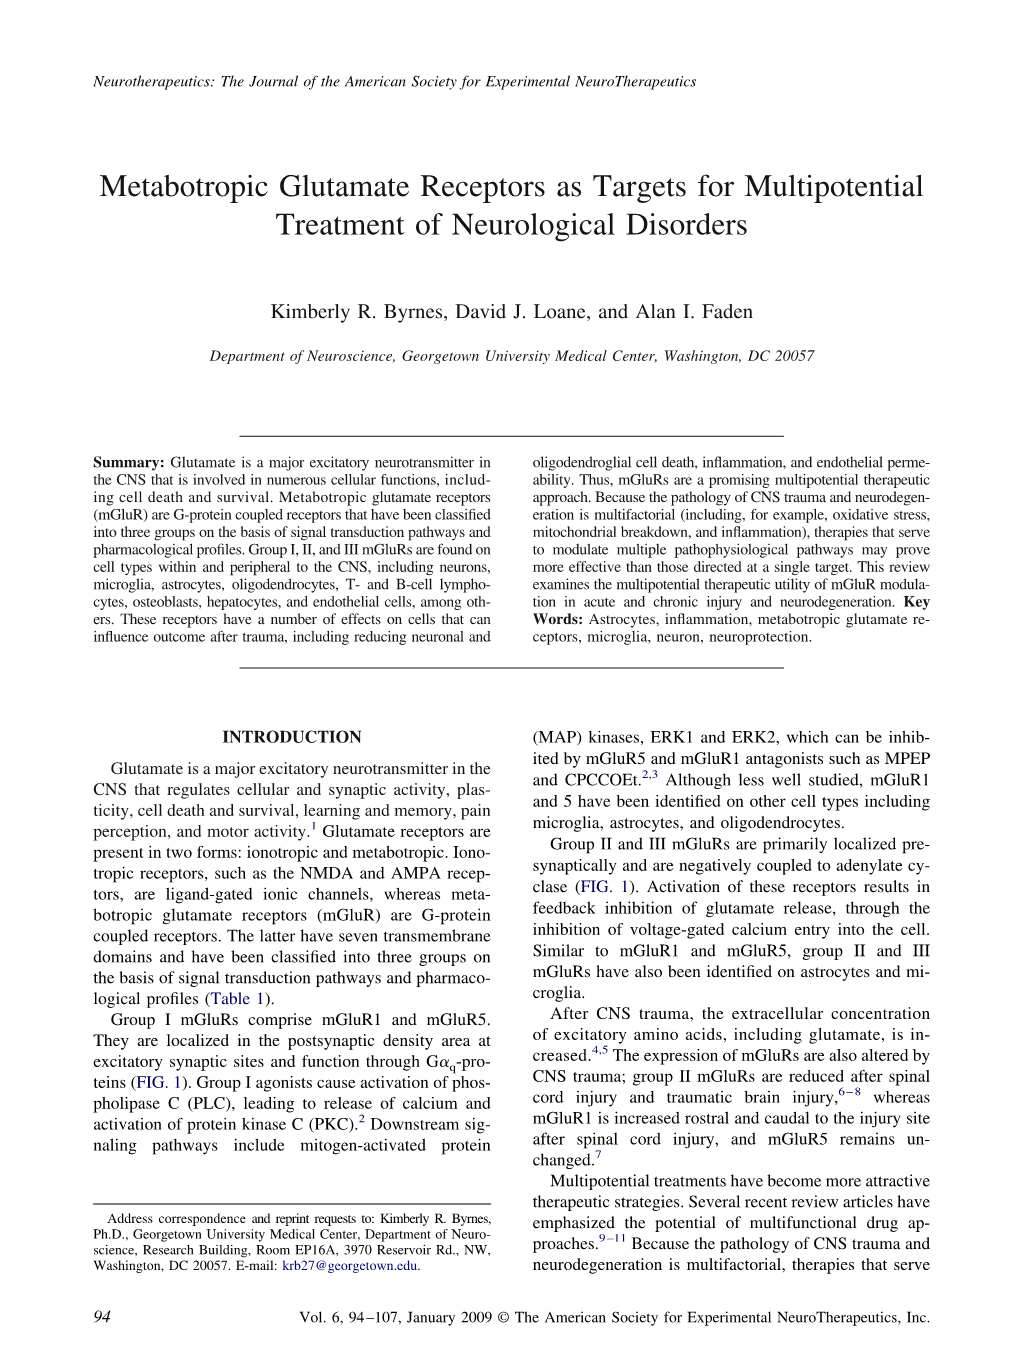 Metabotropic Glutamate Receptors As Targets for Multipotential Treatment of Neurological Disorders